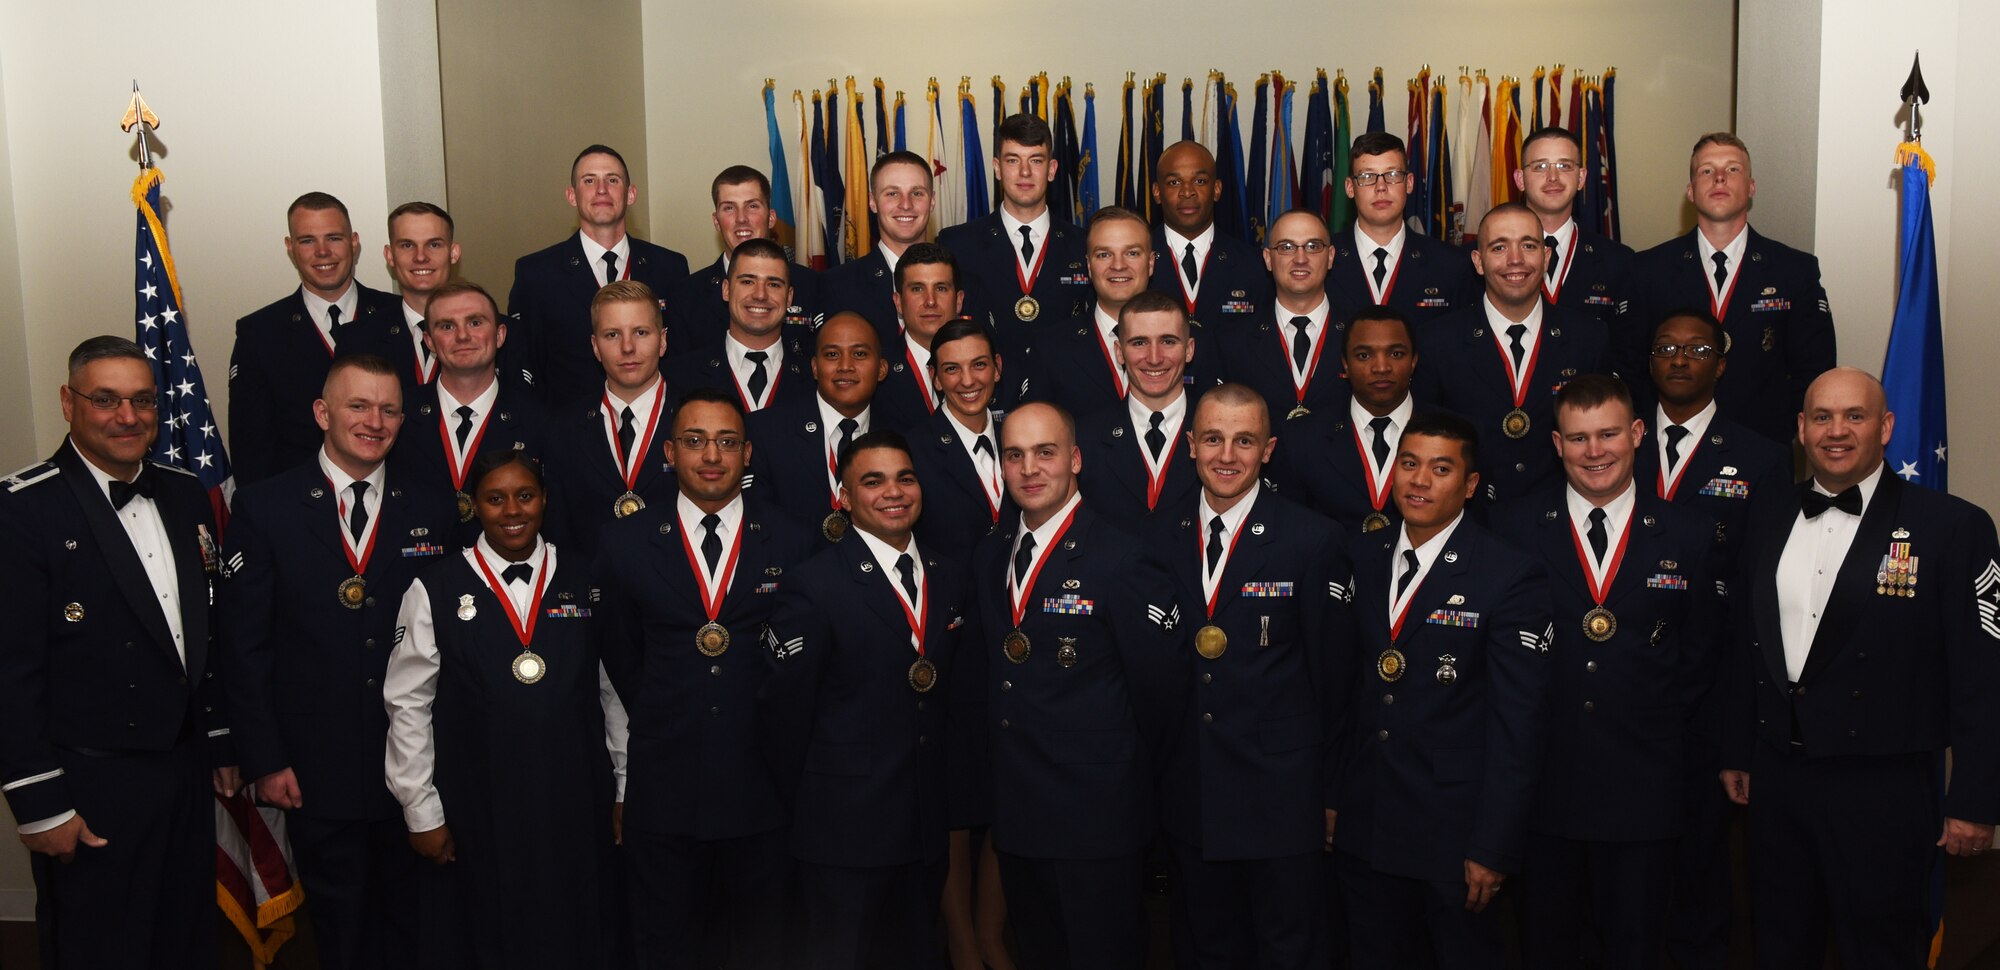 Col. Stephen Kravitsky, 90th Missile Wing commander and Chief Master Sgt. Jeffery Steagall, 90th Missile Wing command chief, pose with the graduating Airman Leadership School Class 17-A students at F.E. Warren Air Force Base, Wyo., Nov. 9, 2016. Enlisted Airmen must complete the rigorous professional military education course to become supervisors of other Airmen. (U.S. Air Force photo by Airman 1st Class Breanna Carter)